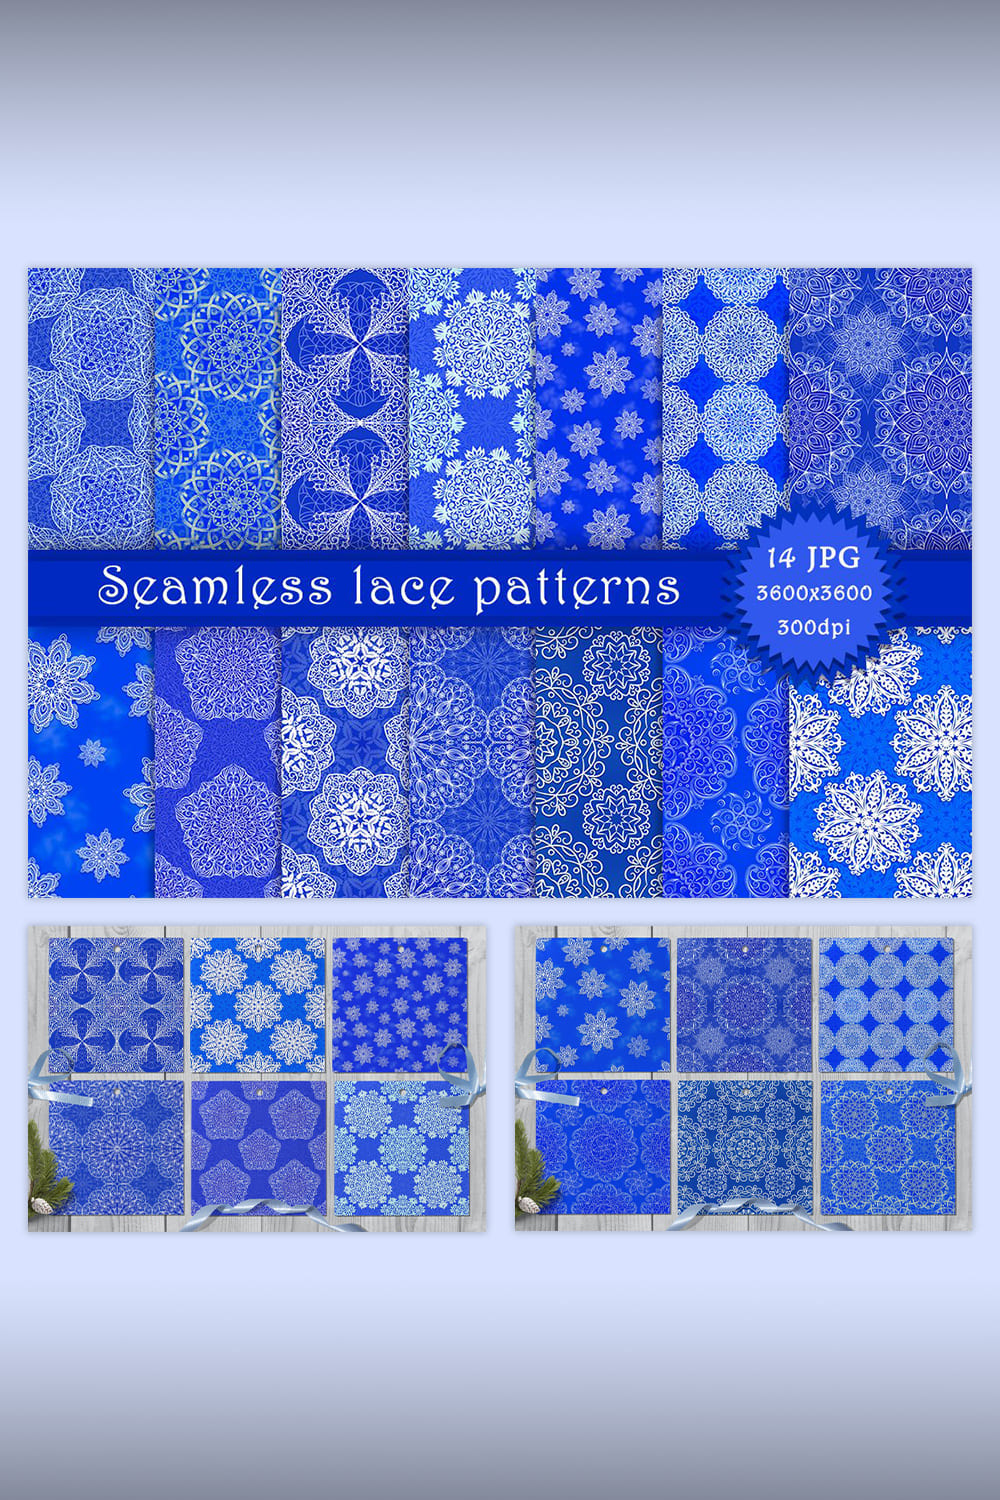 Cover with different white and blue seamless patterns and white title "Seamless Lace Patterns".